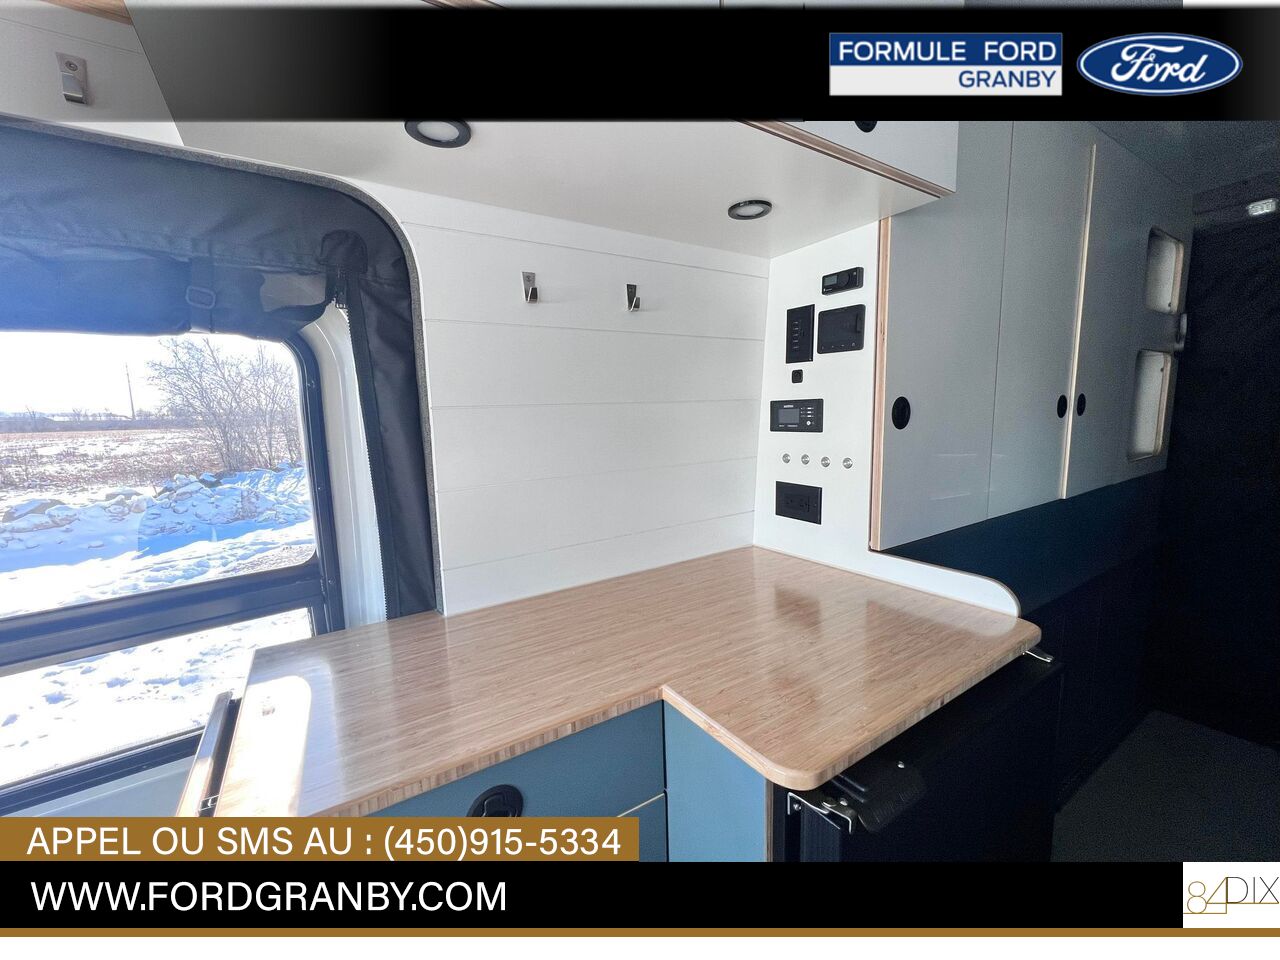 2019 Ford Transit fourgon utilitaire Granby - photo #34